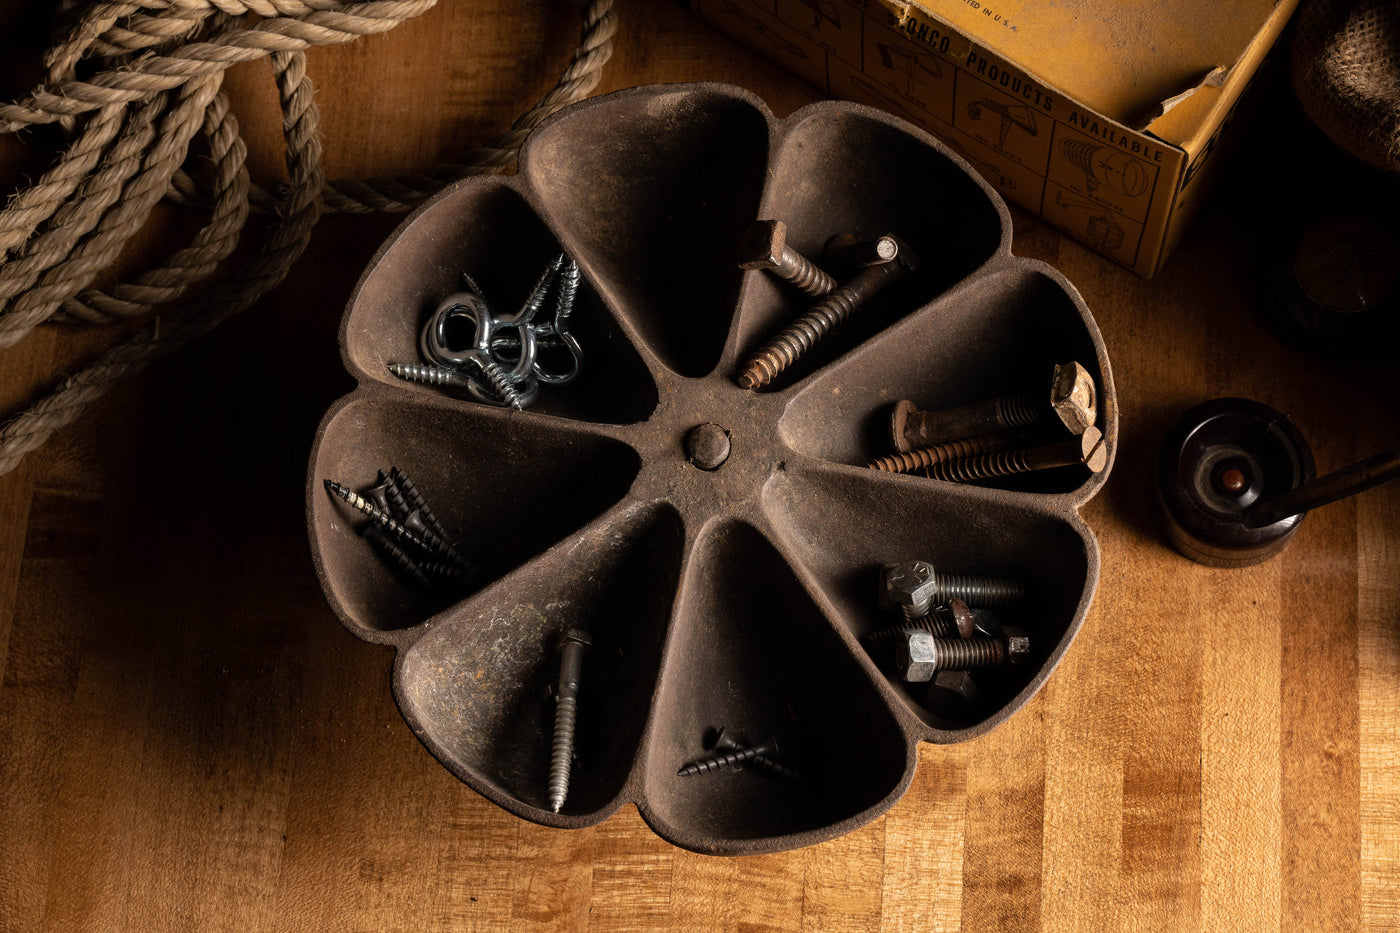 Late 19th Century Cast Iron Cobbler's Nail Caddy